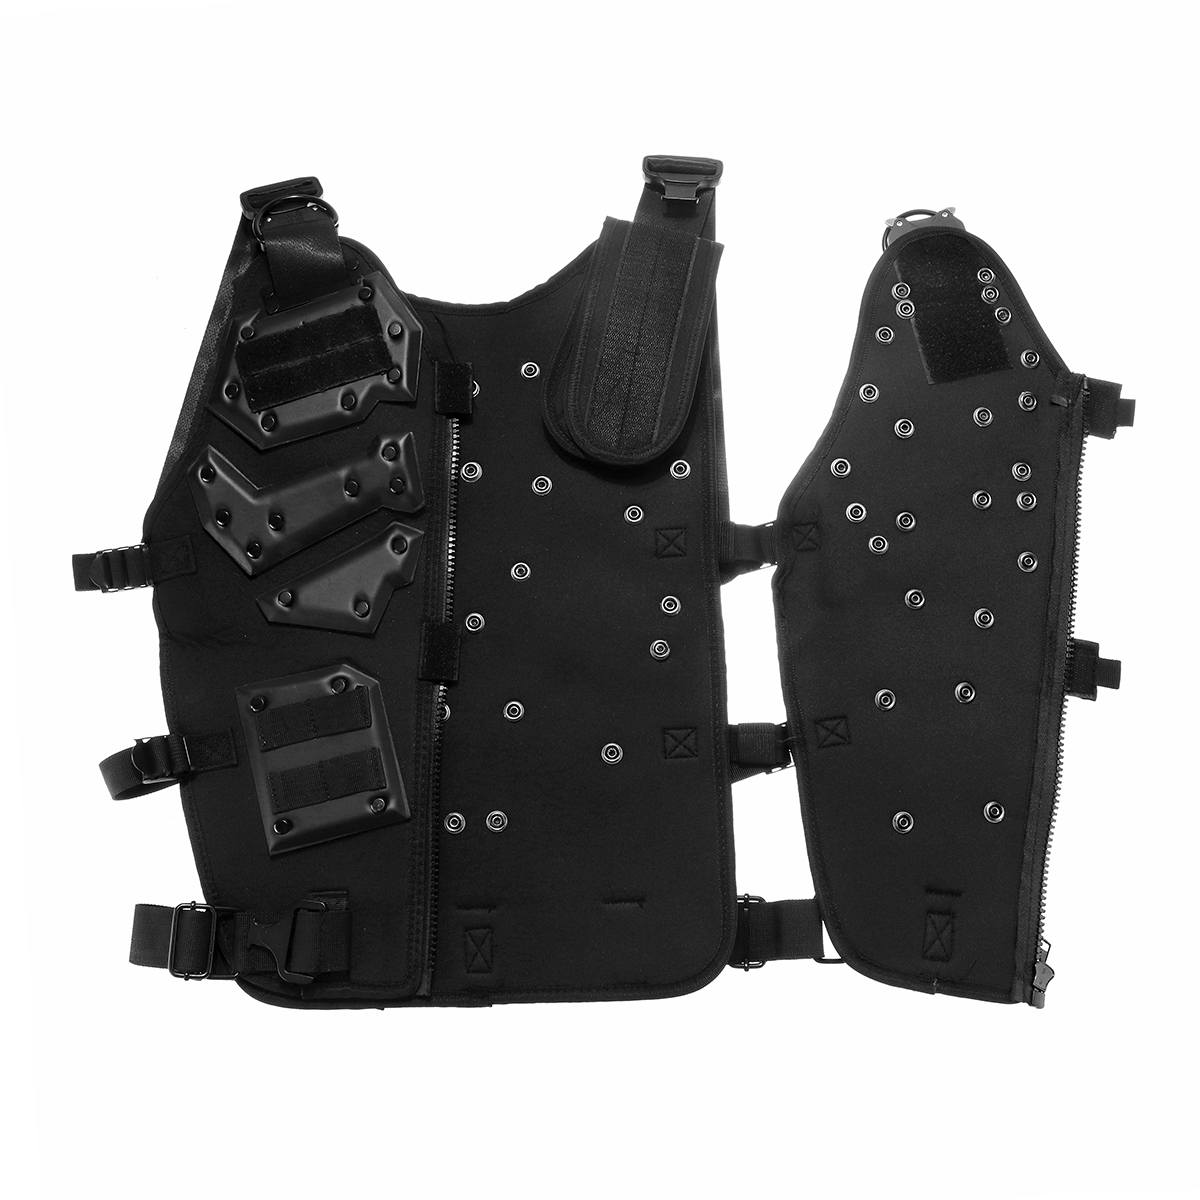 Airsoft Military Tactical Vest Molle Hunting Combat Body Armor Vest Outdoor Game Clothing Hunting Vest Training Protection